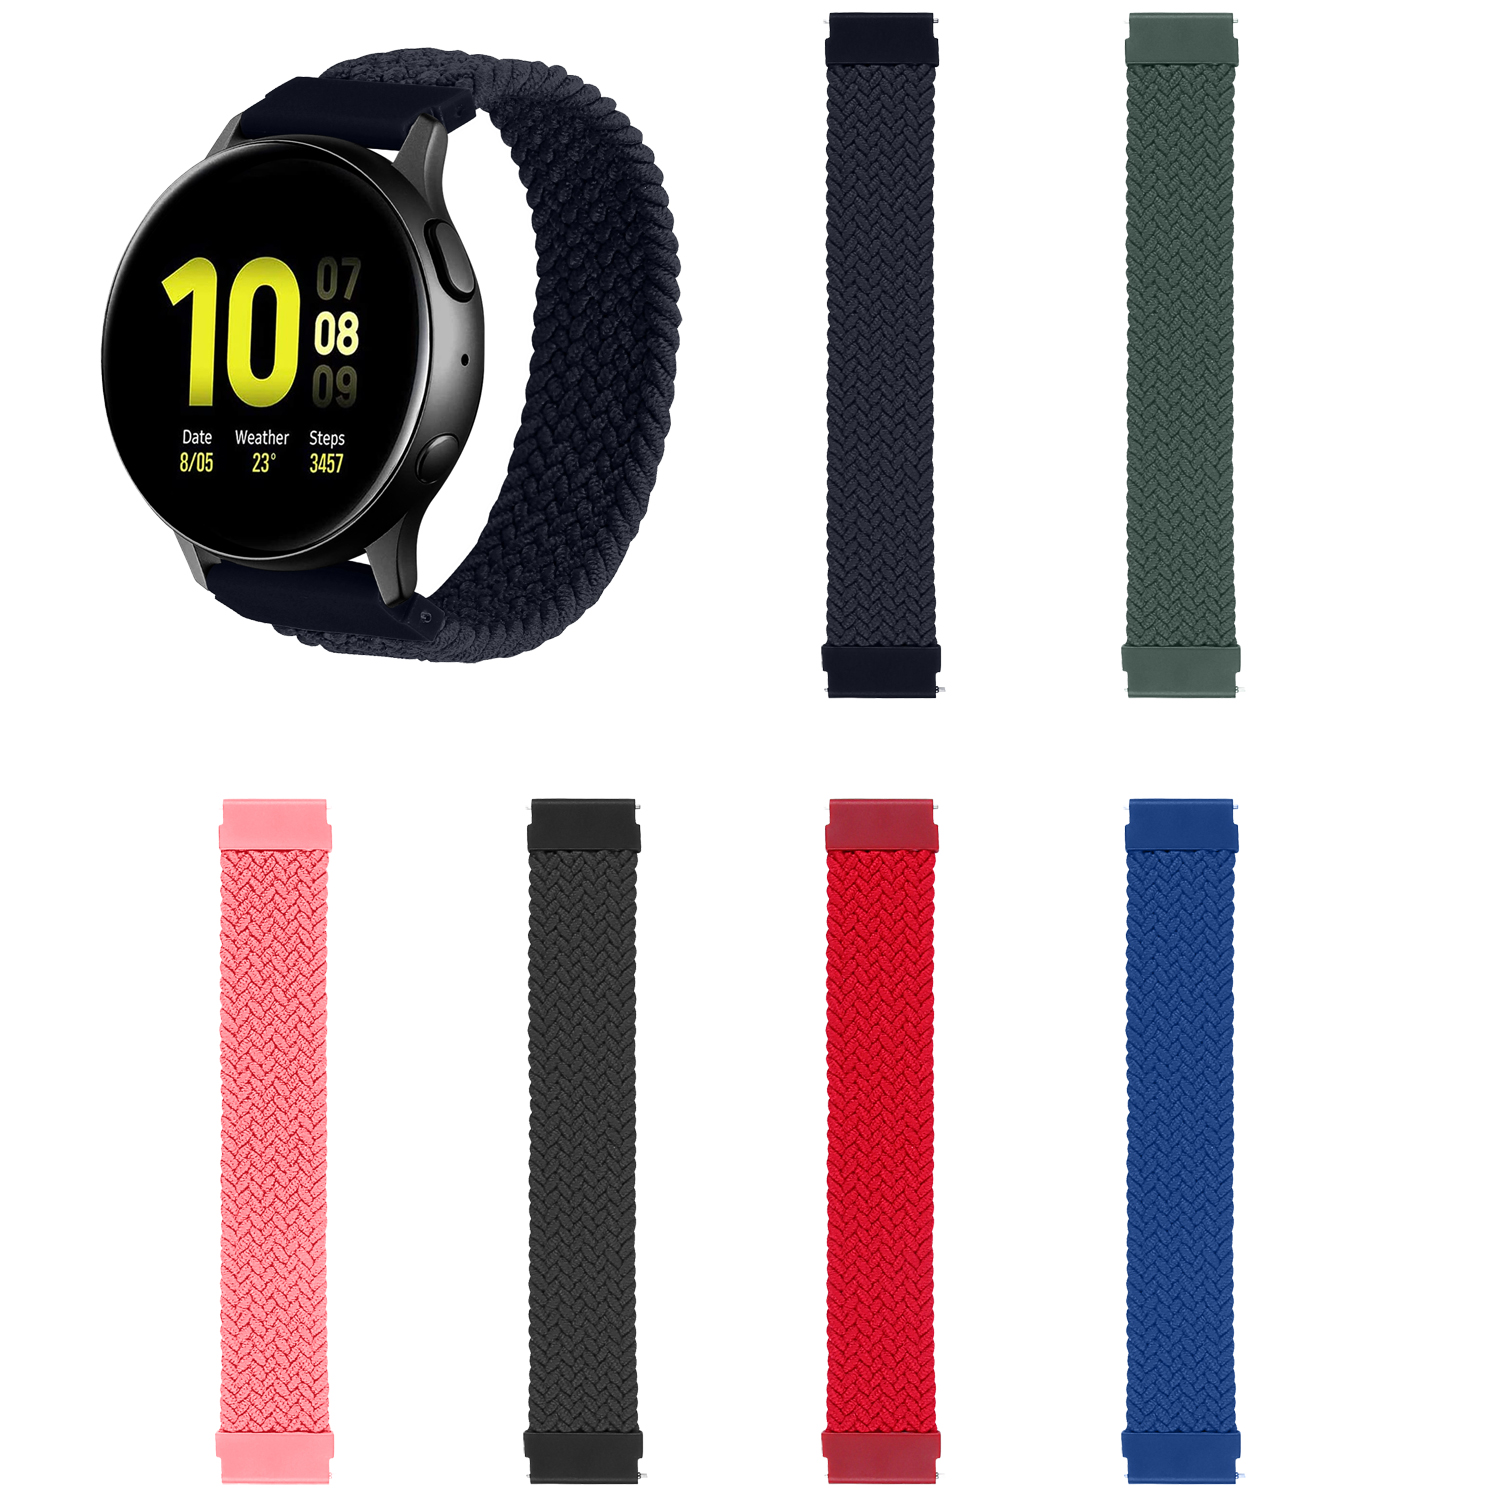 Bakeey-22mm-Universal-Nylon-Braided-Replacement-Strap-Smart-Watch-Band-For-Samsung-Galaxy-Watch-3-45-1791980-1